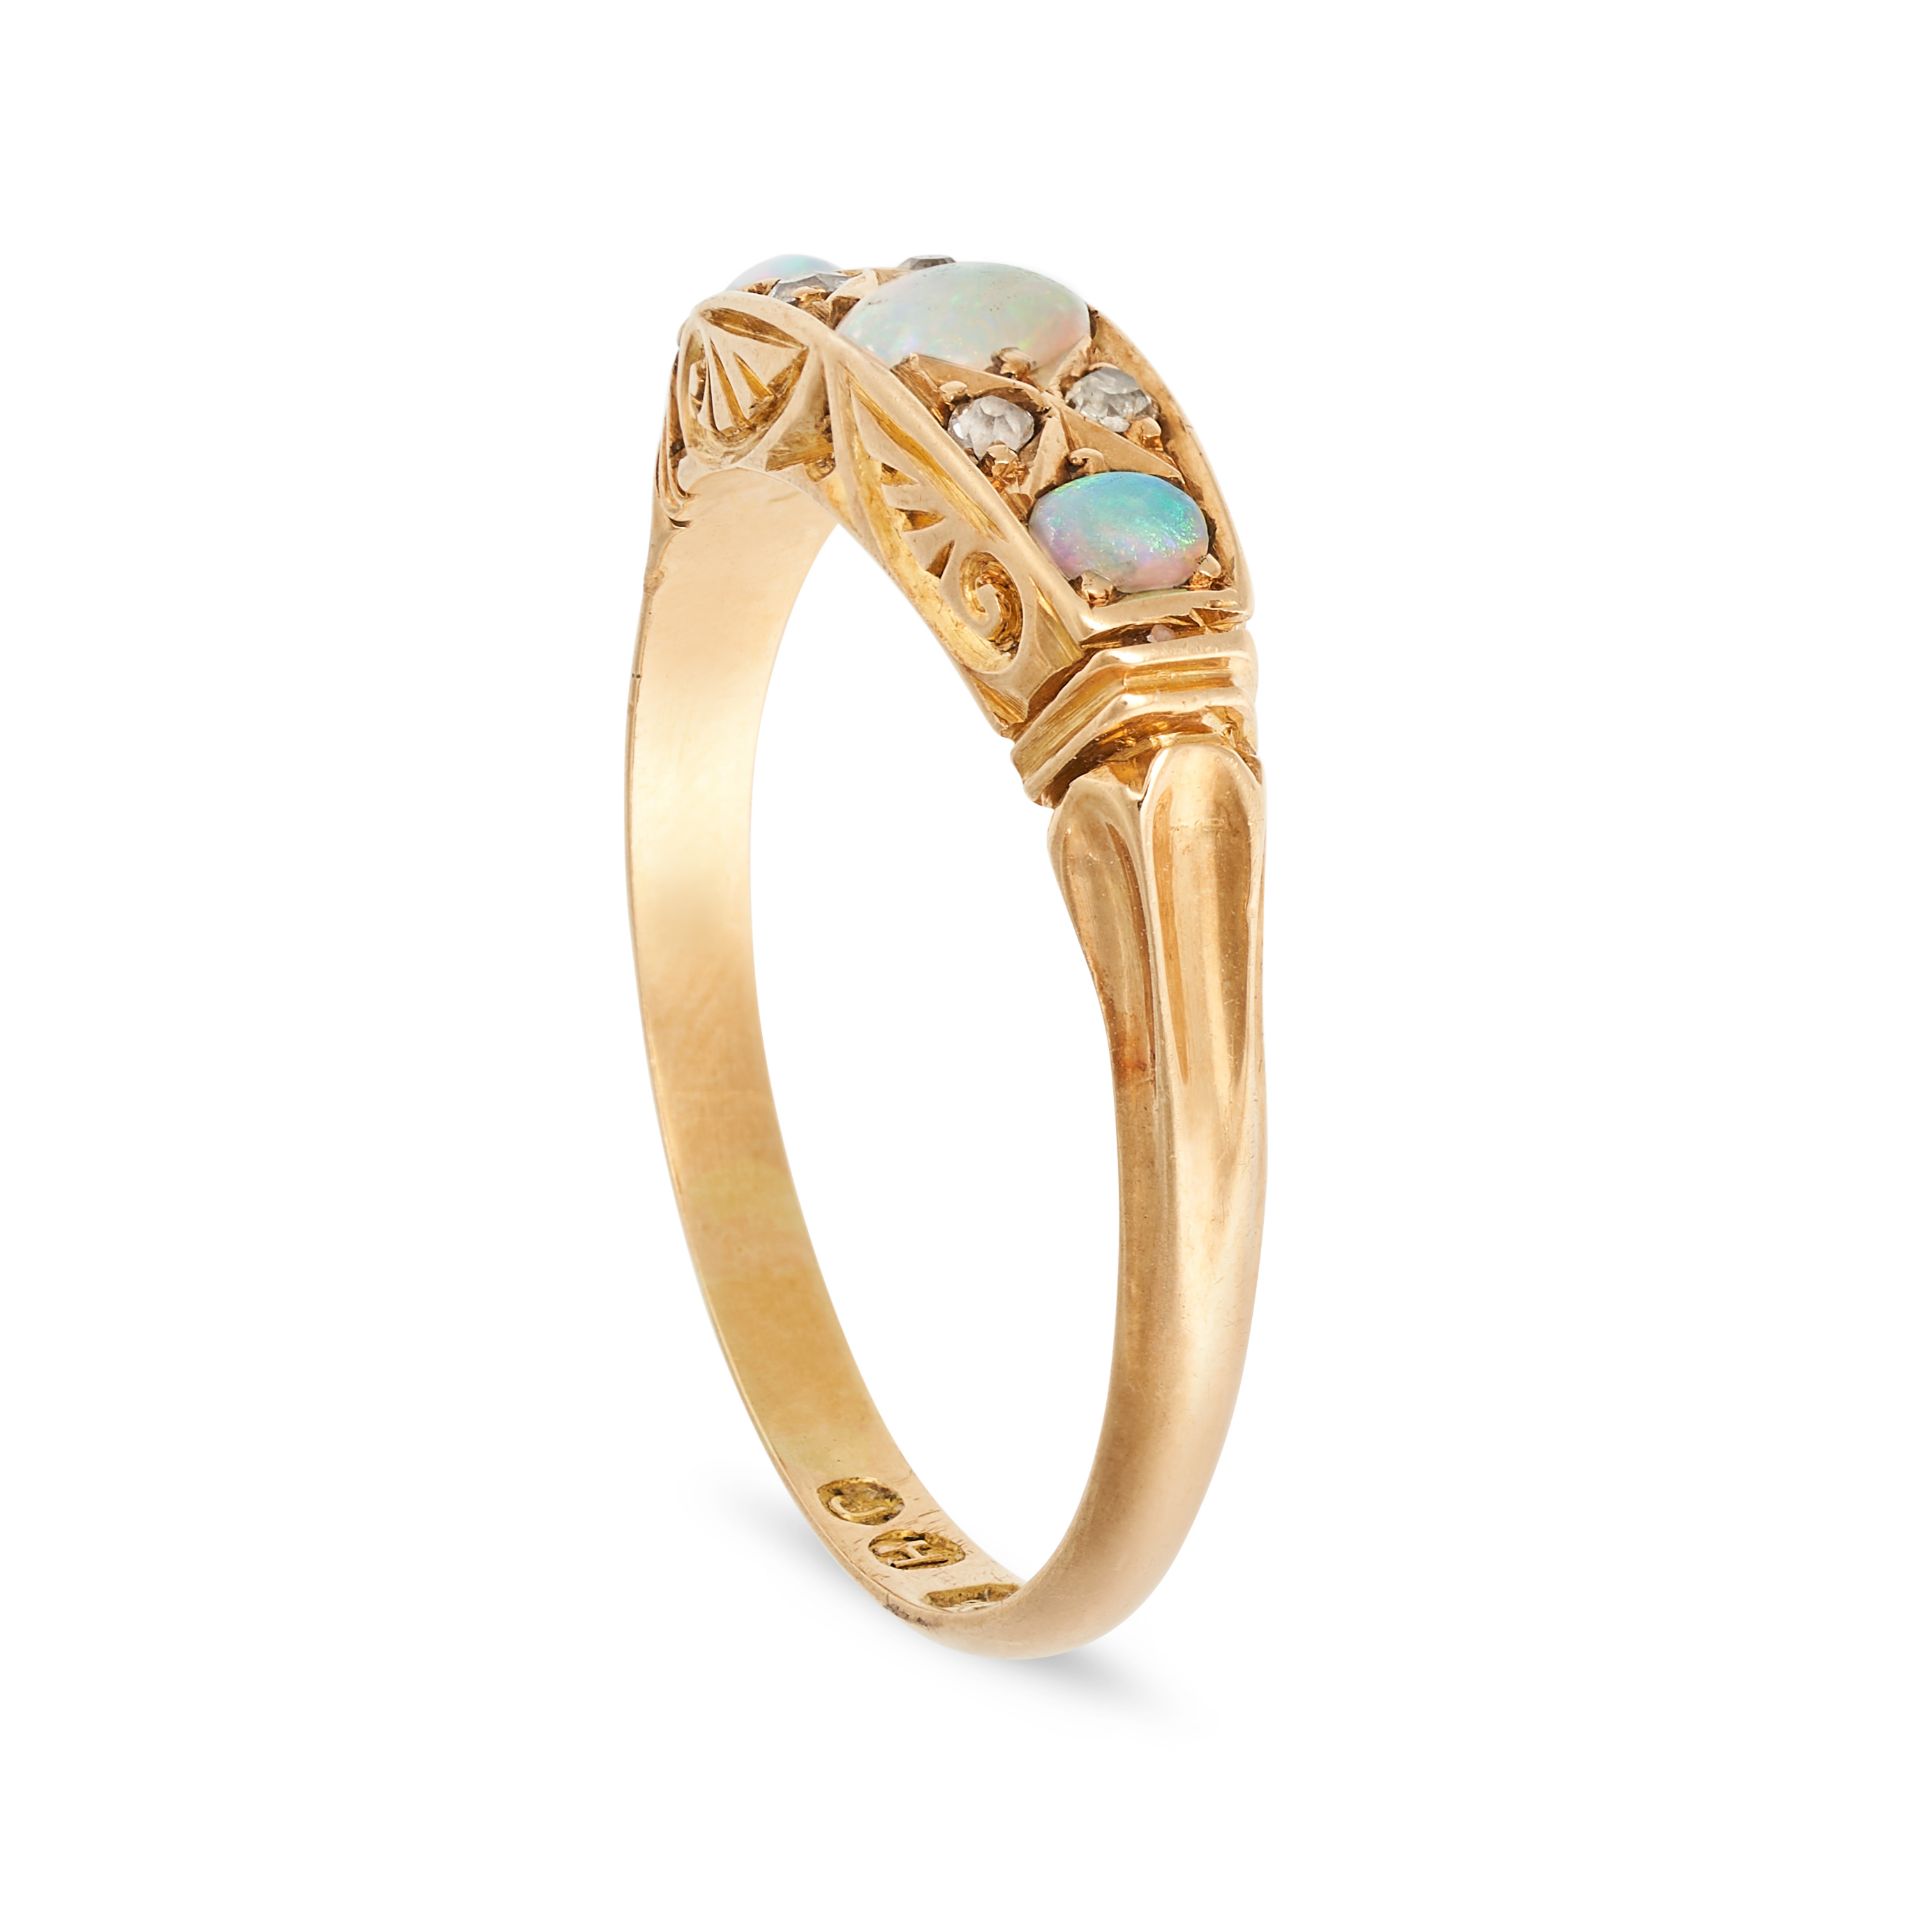 AN ANTIQUE EDWARDIAN OPAL AND DIAMOND RING in 18ct yellow gold, set with three cabochon opals pun... - Image 2 of 2